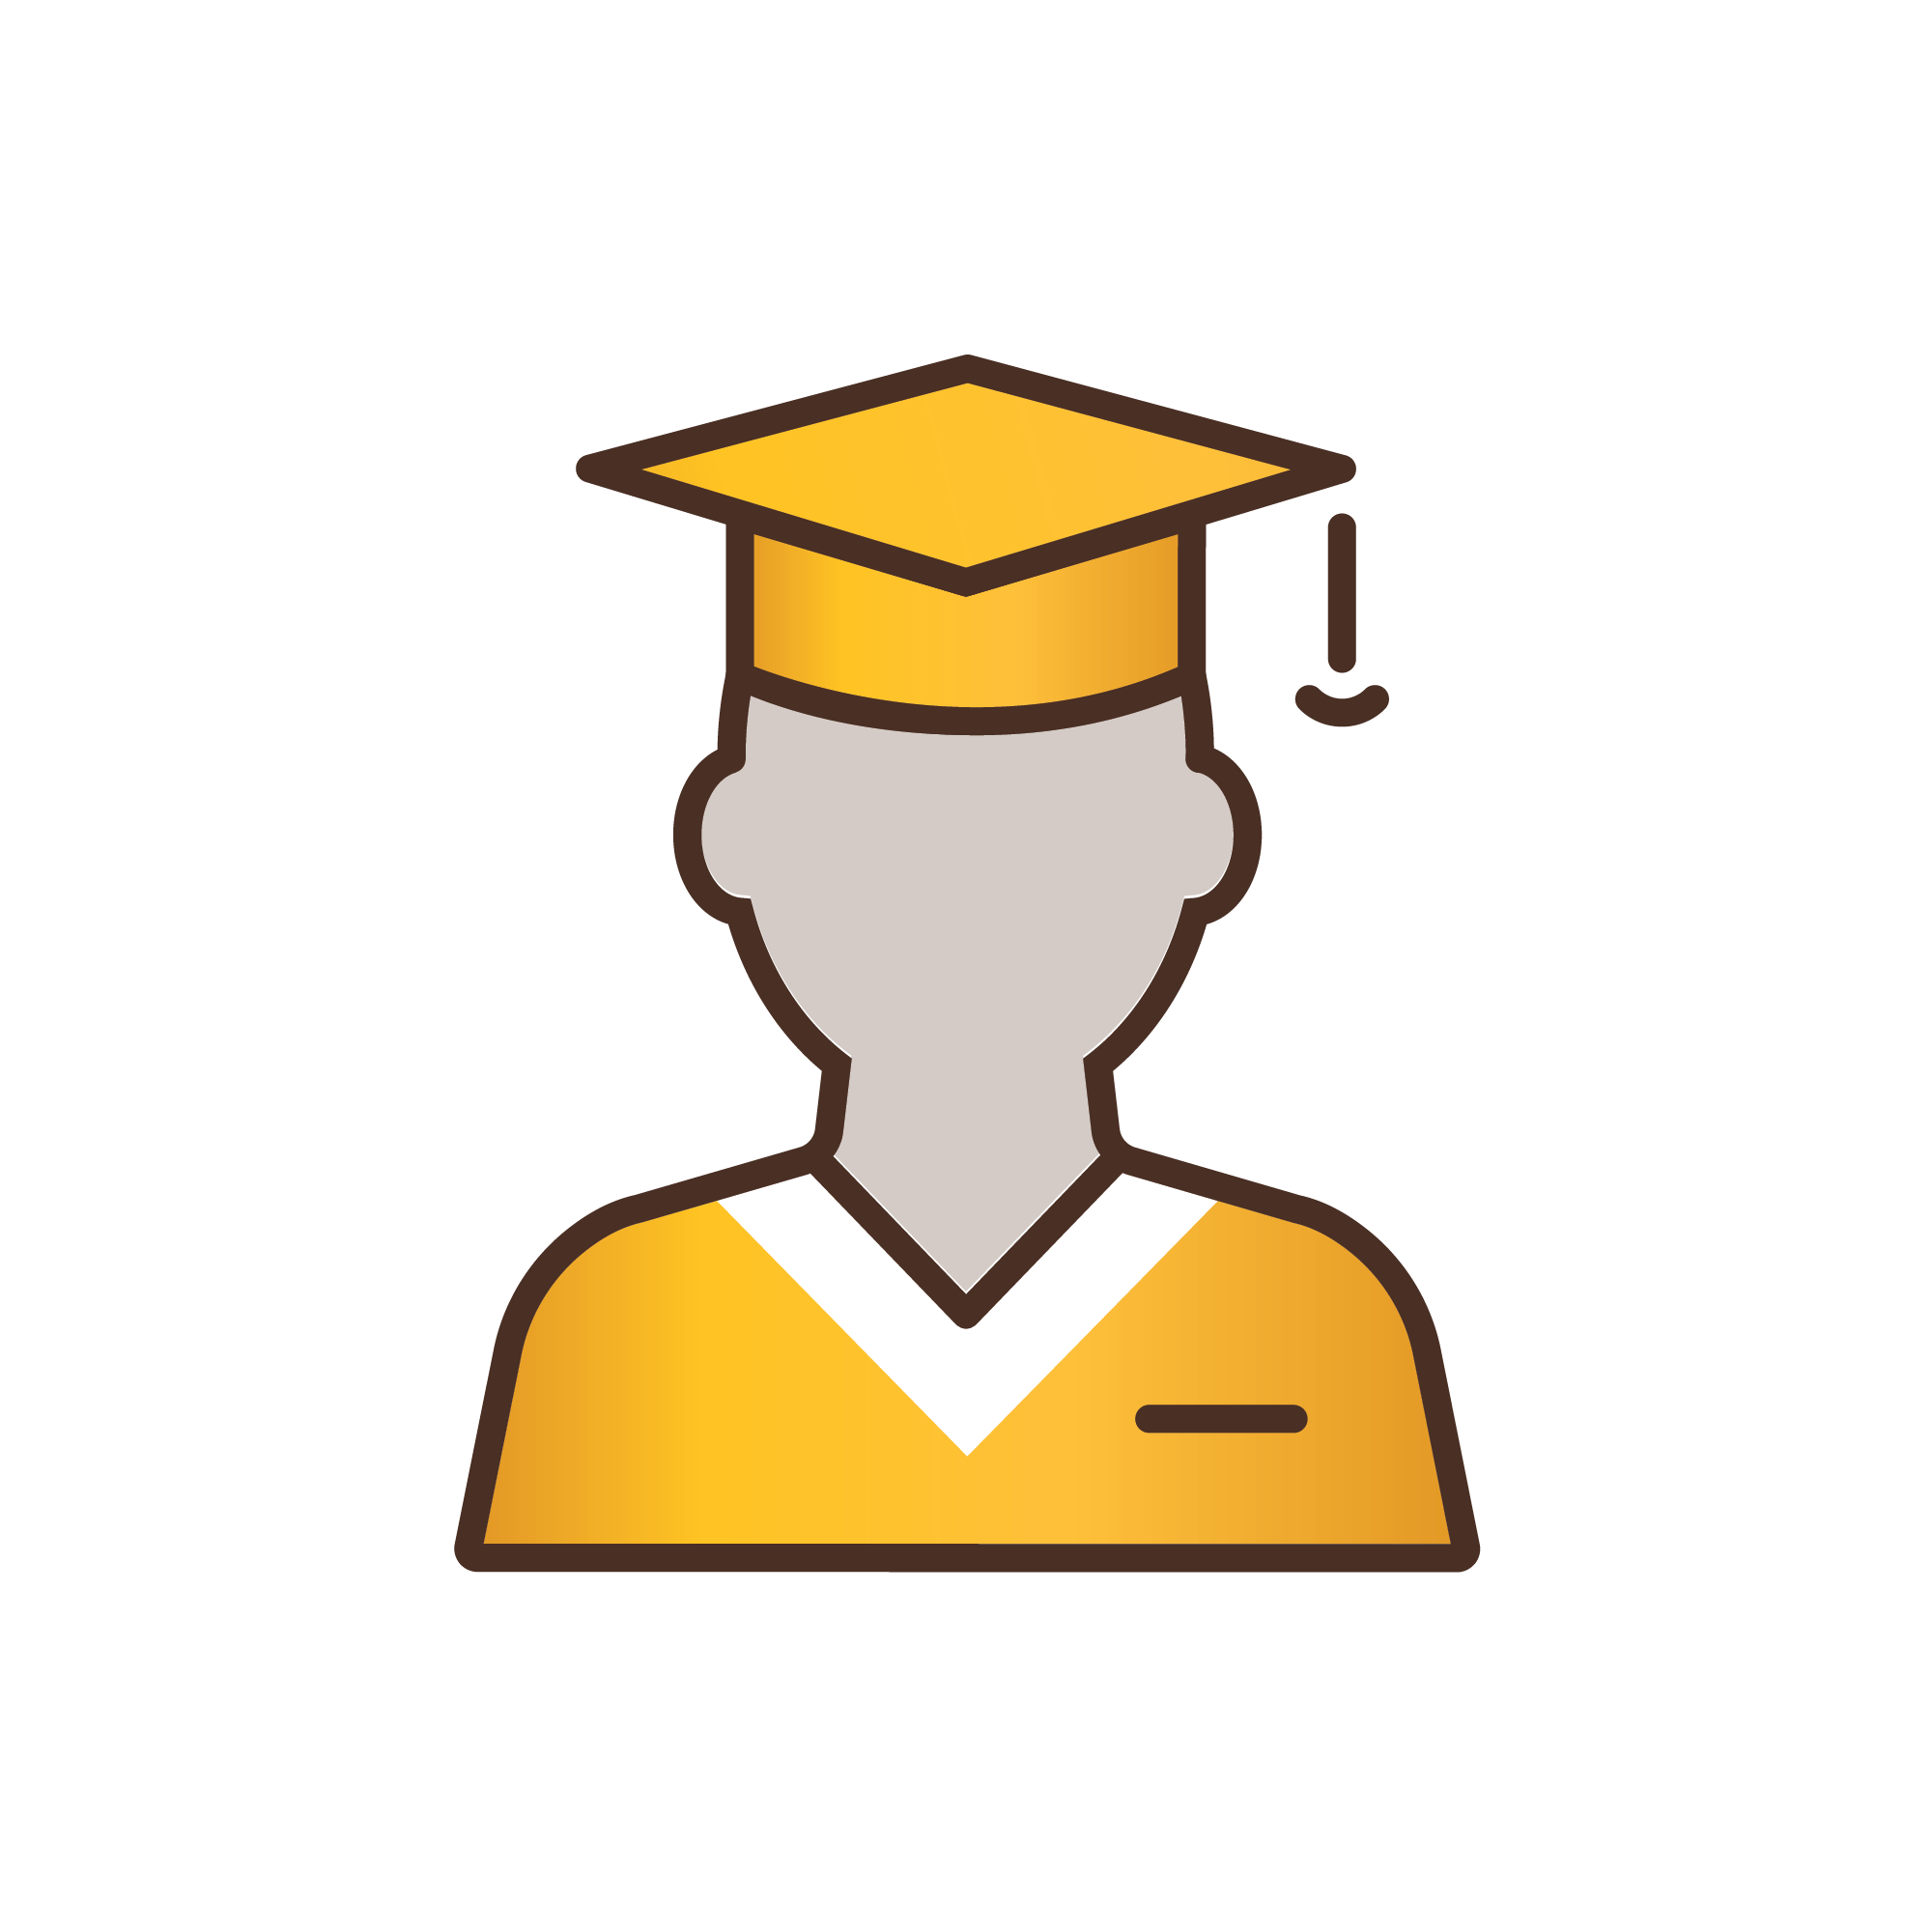 Outline drawing of a person wearing graduation hat